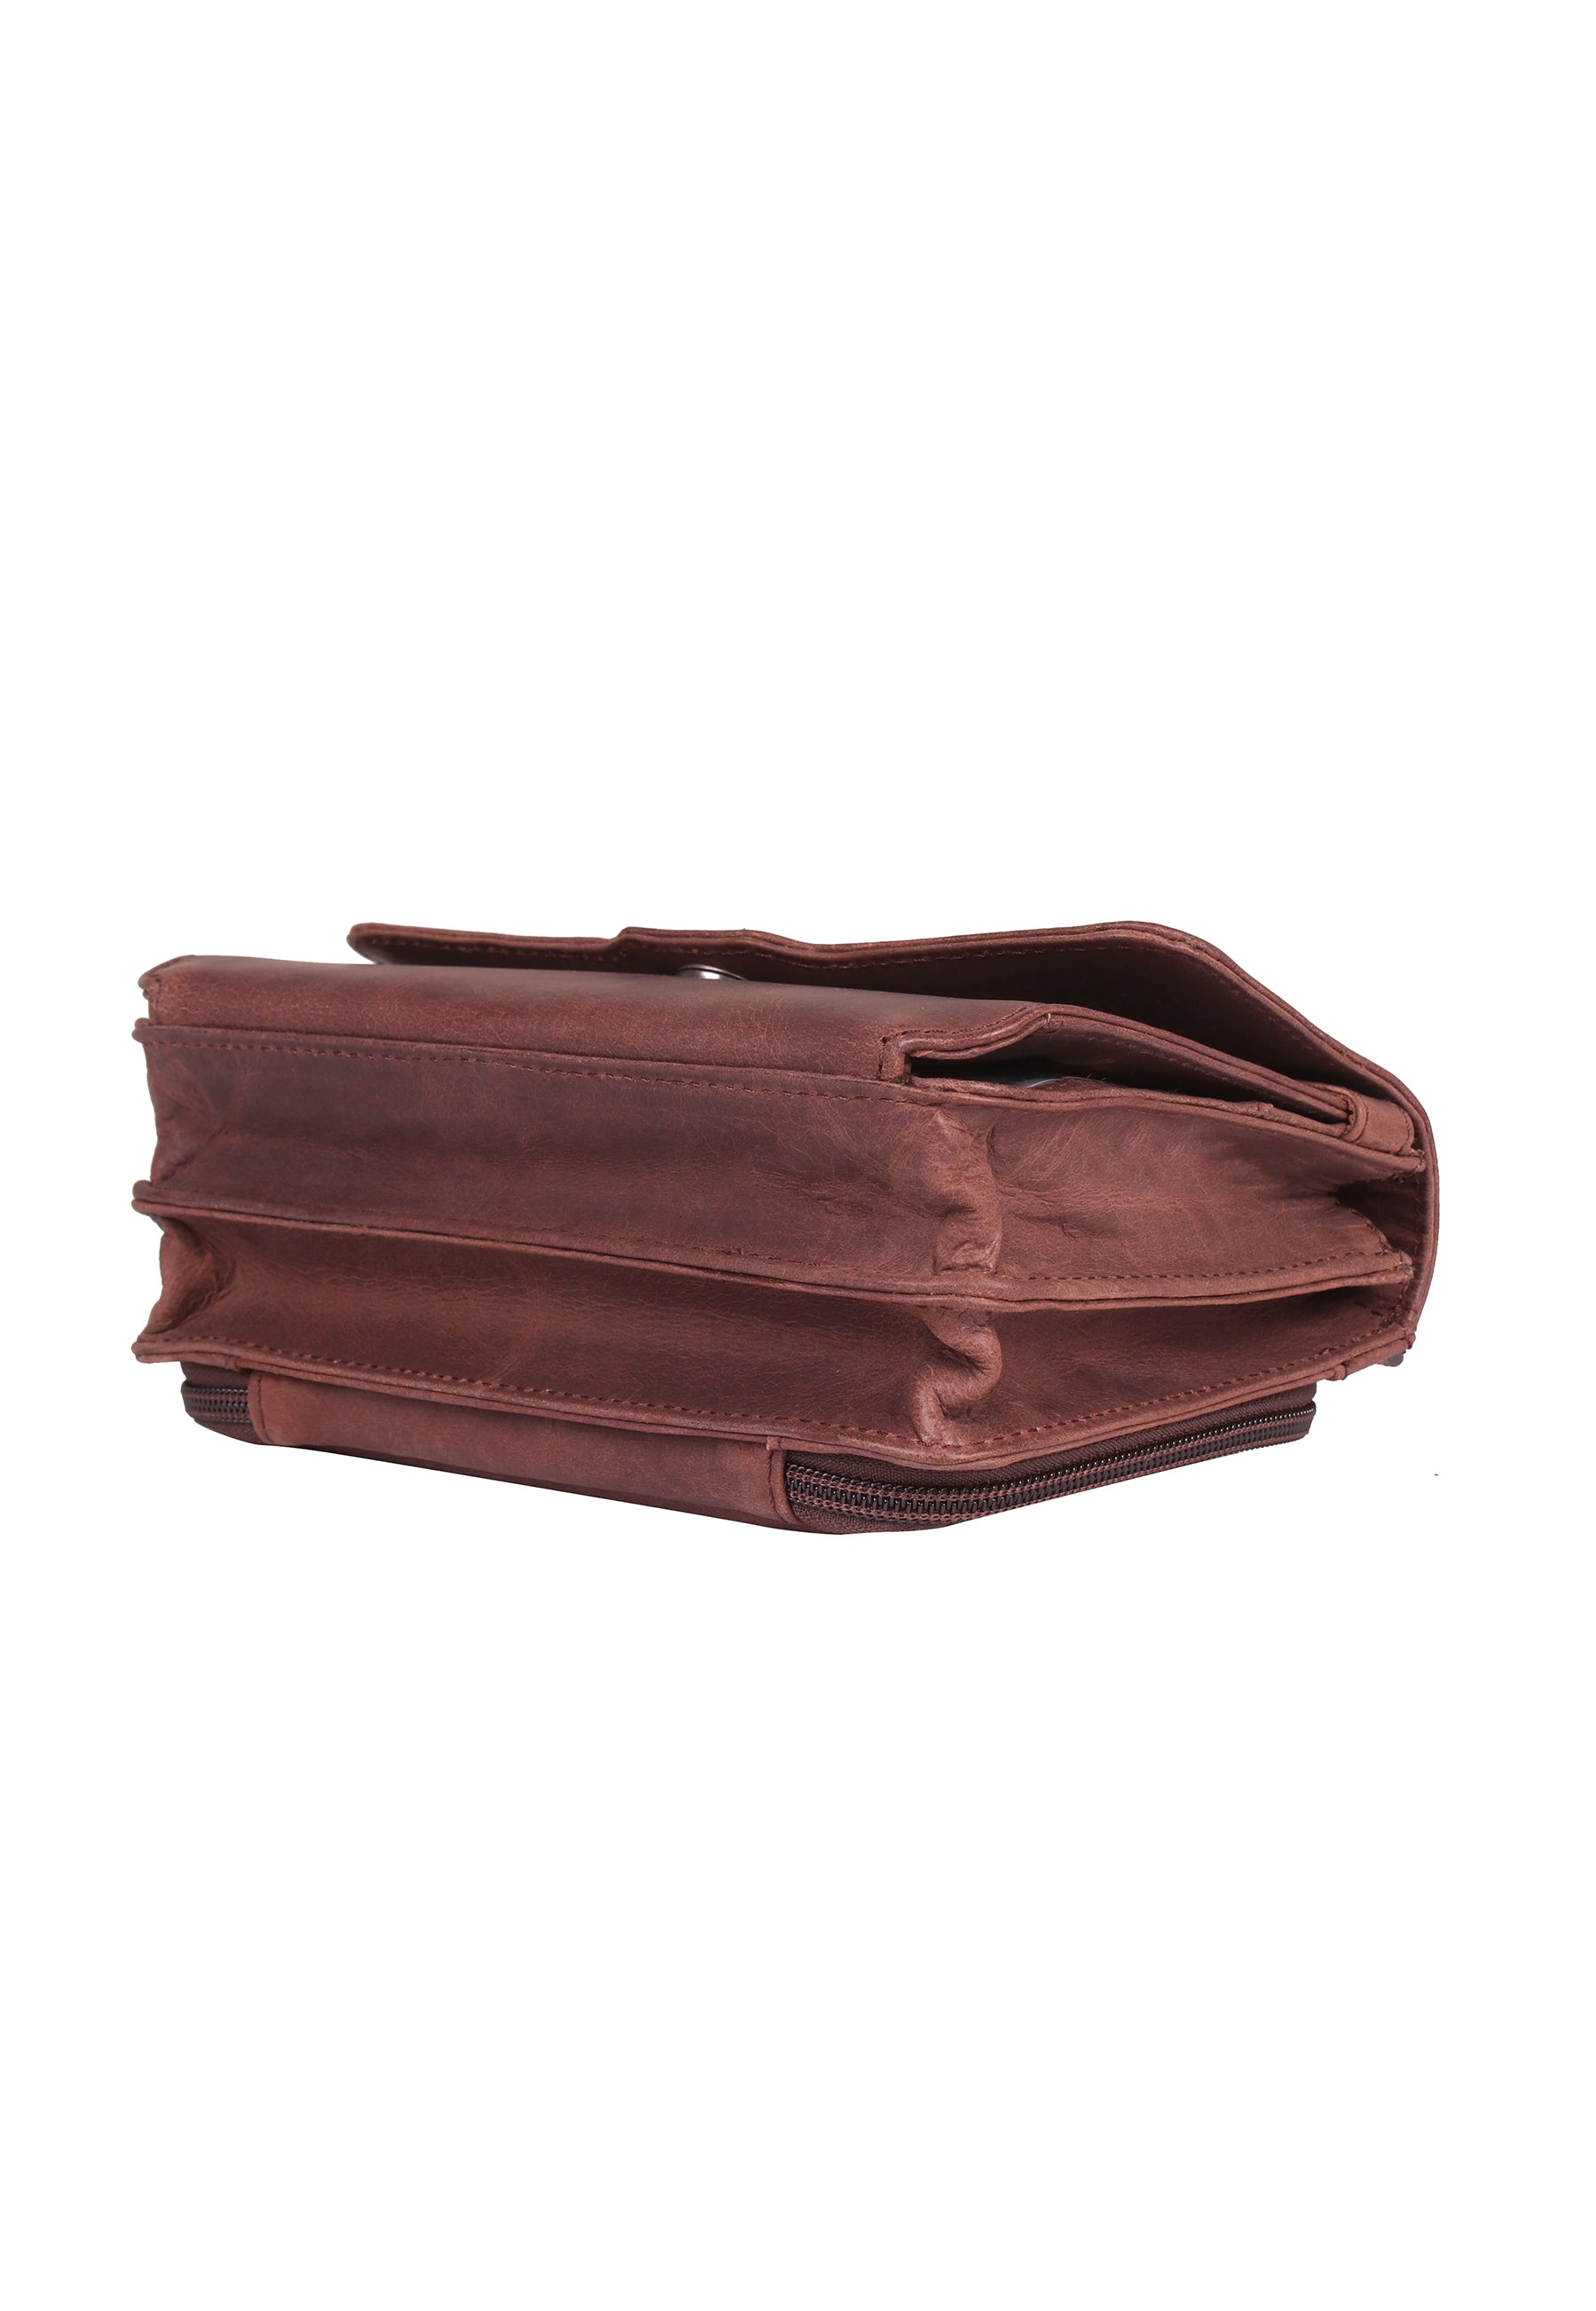 Kailey Leather Purse Pack | Conceal Carry for Women Mahogany